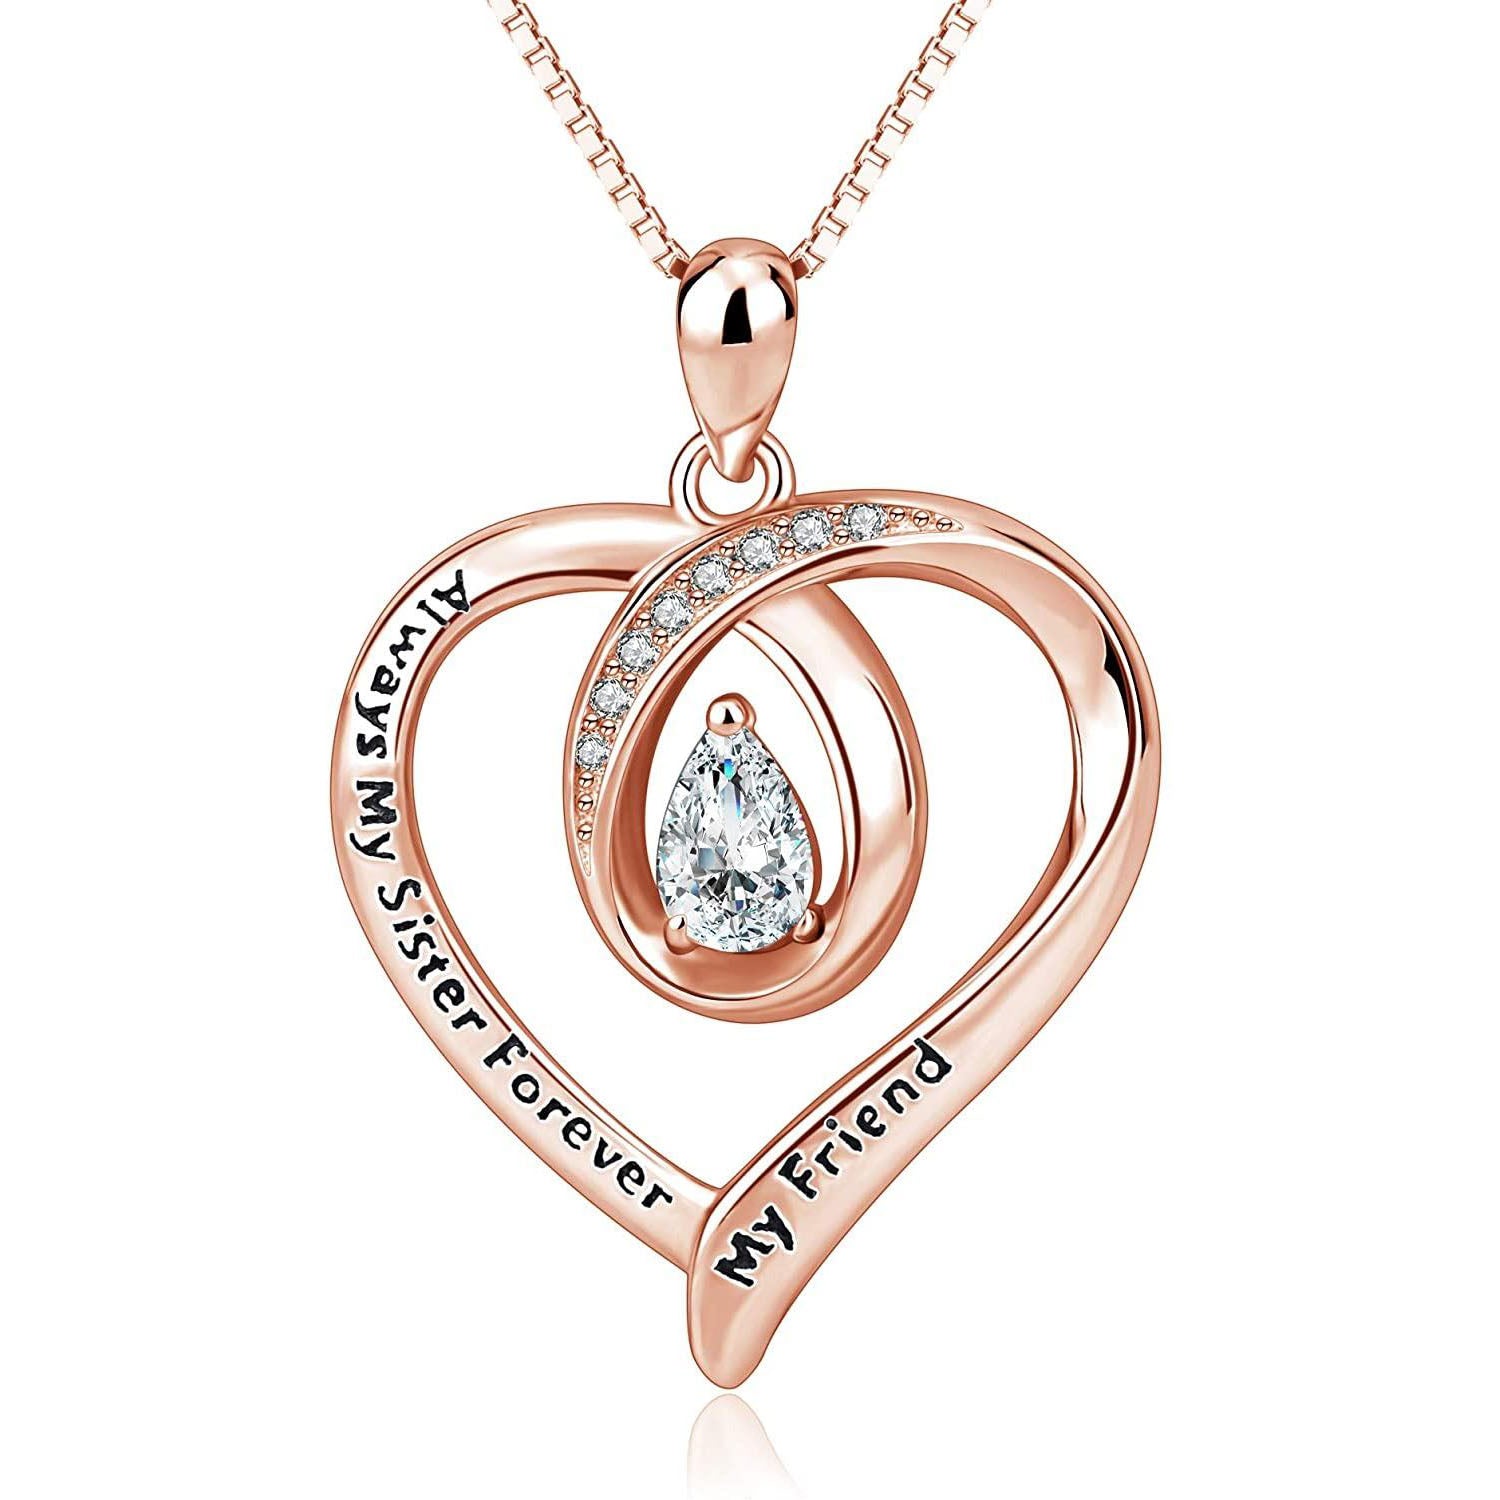 Pure Silver Rose Gold Necklace for Sister